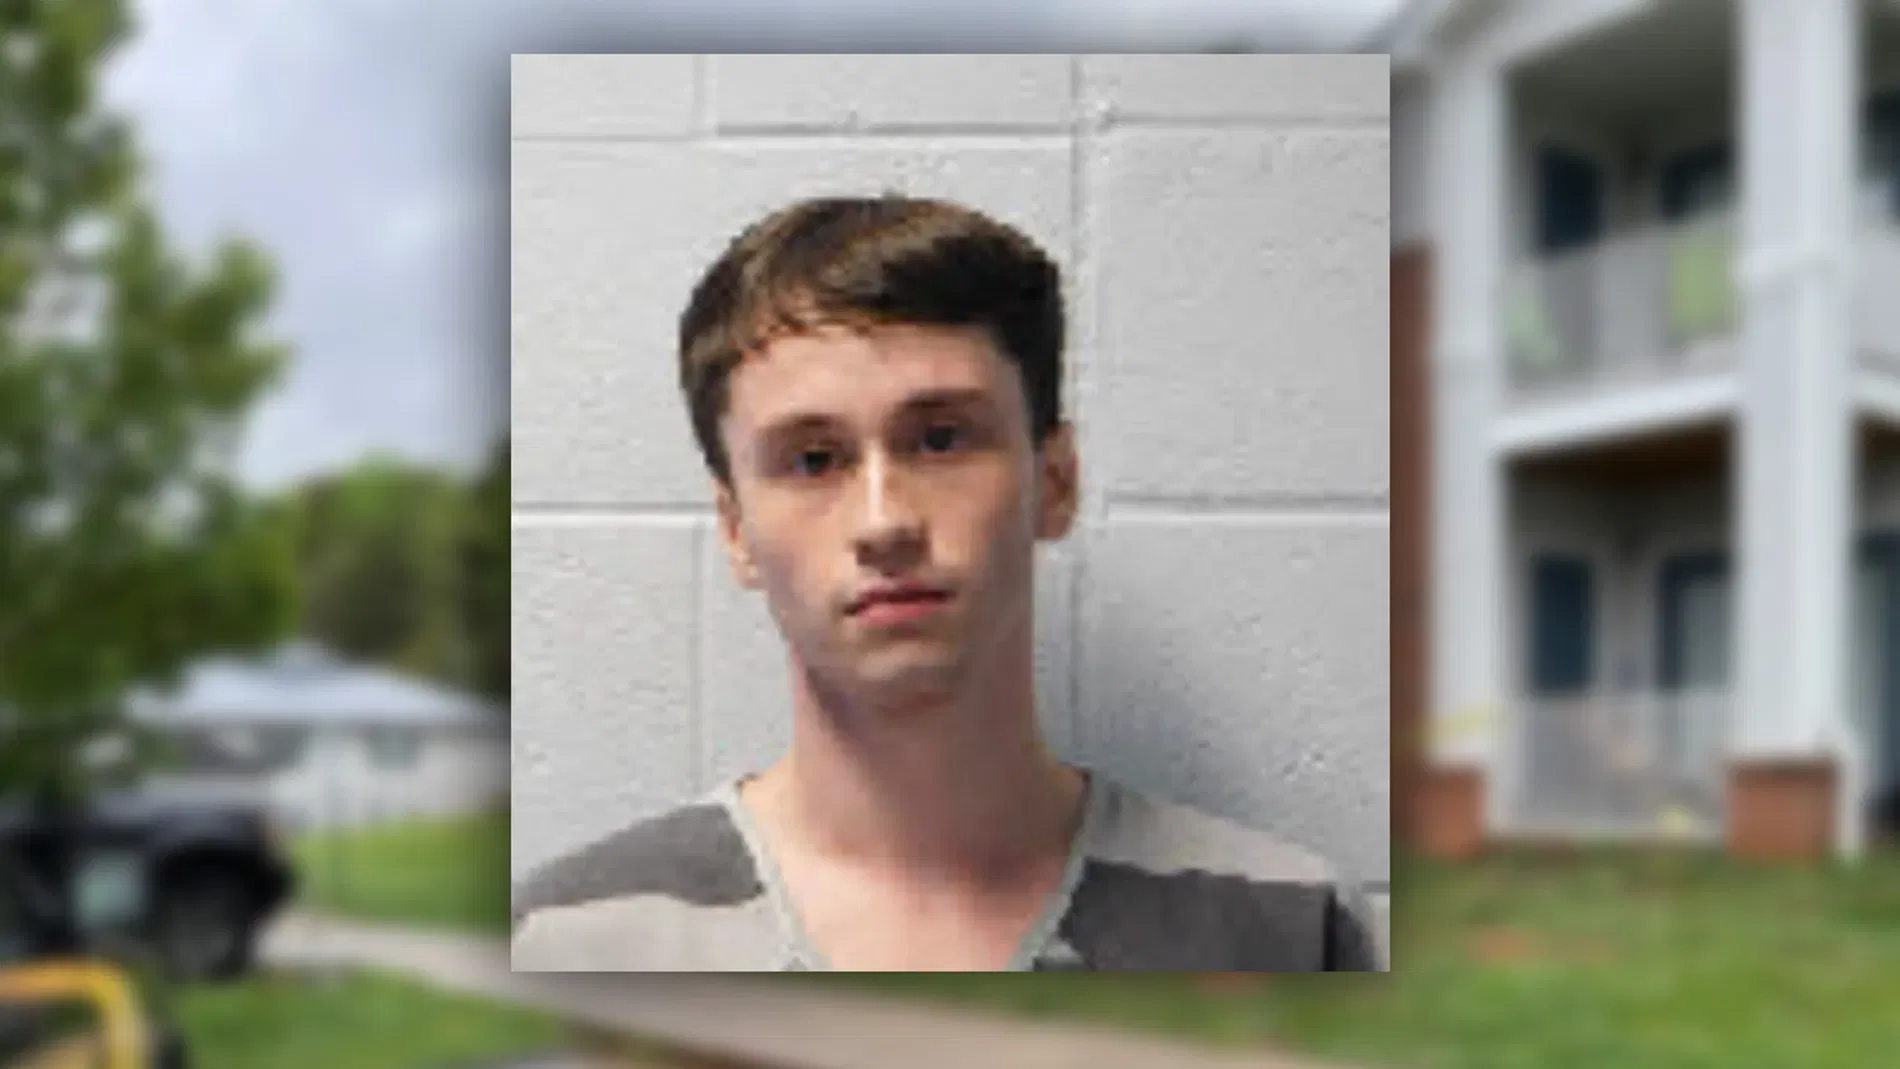 19 YEAR OLD FACES 2ND DEGREE MURDER CHARGE AFTER COLUMBUS APARTMENT COMPLEX SHOOTING 